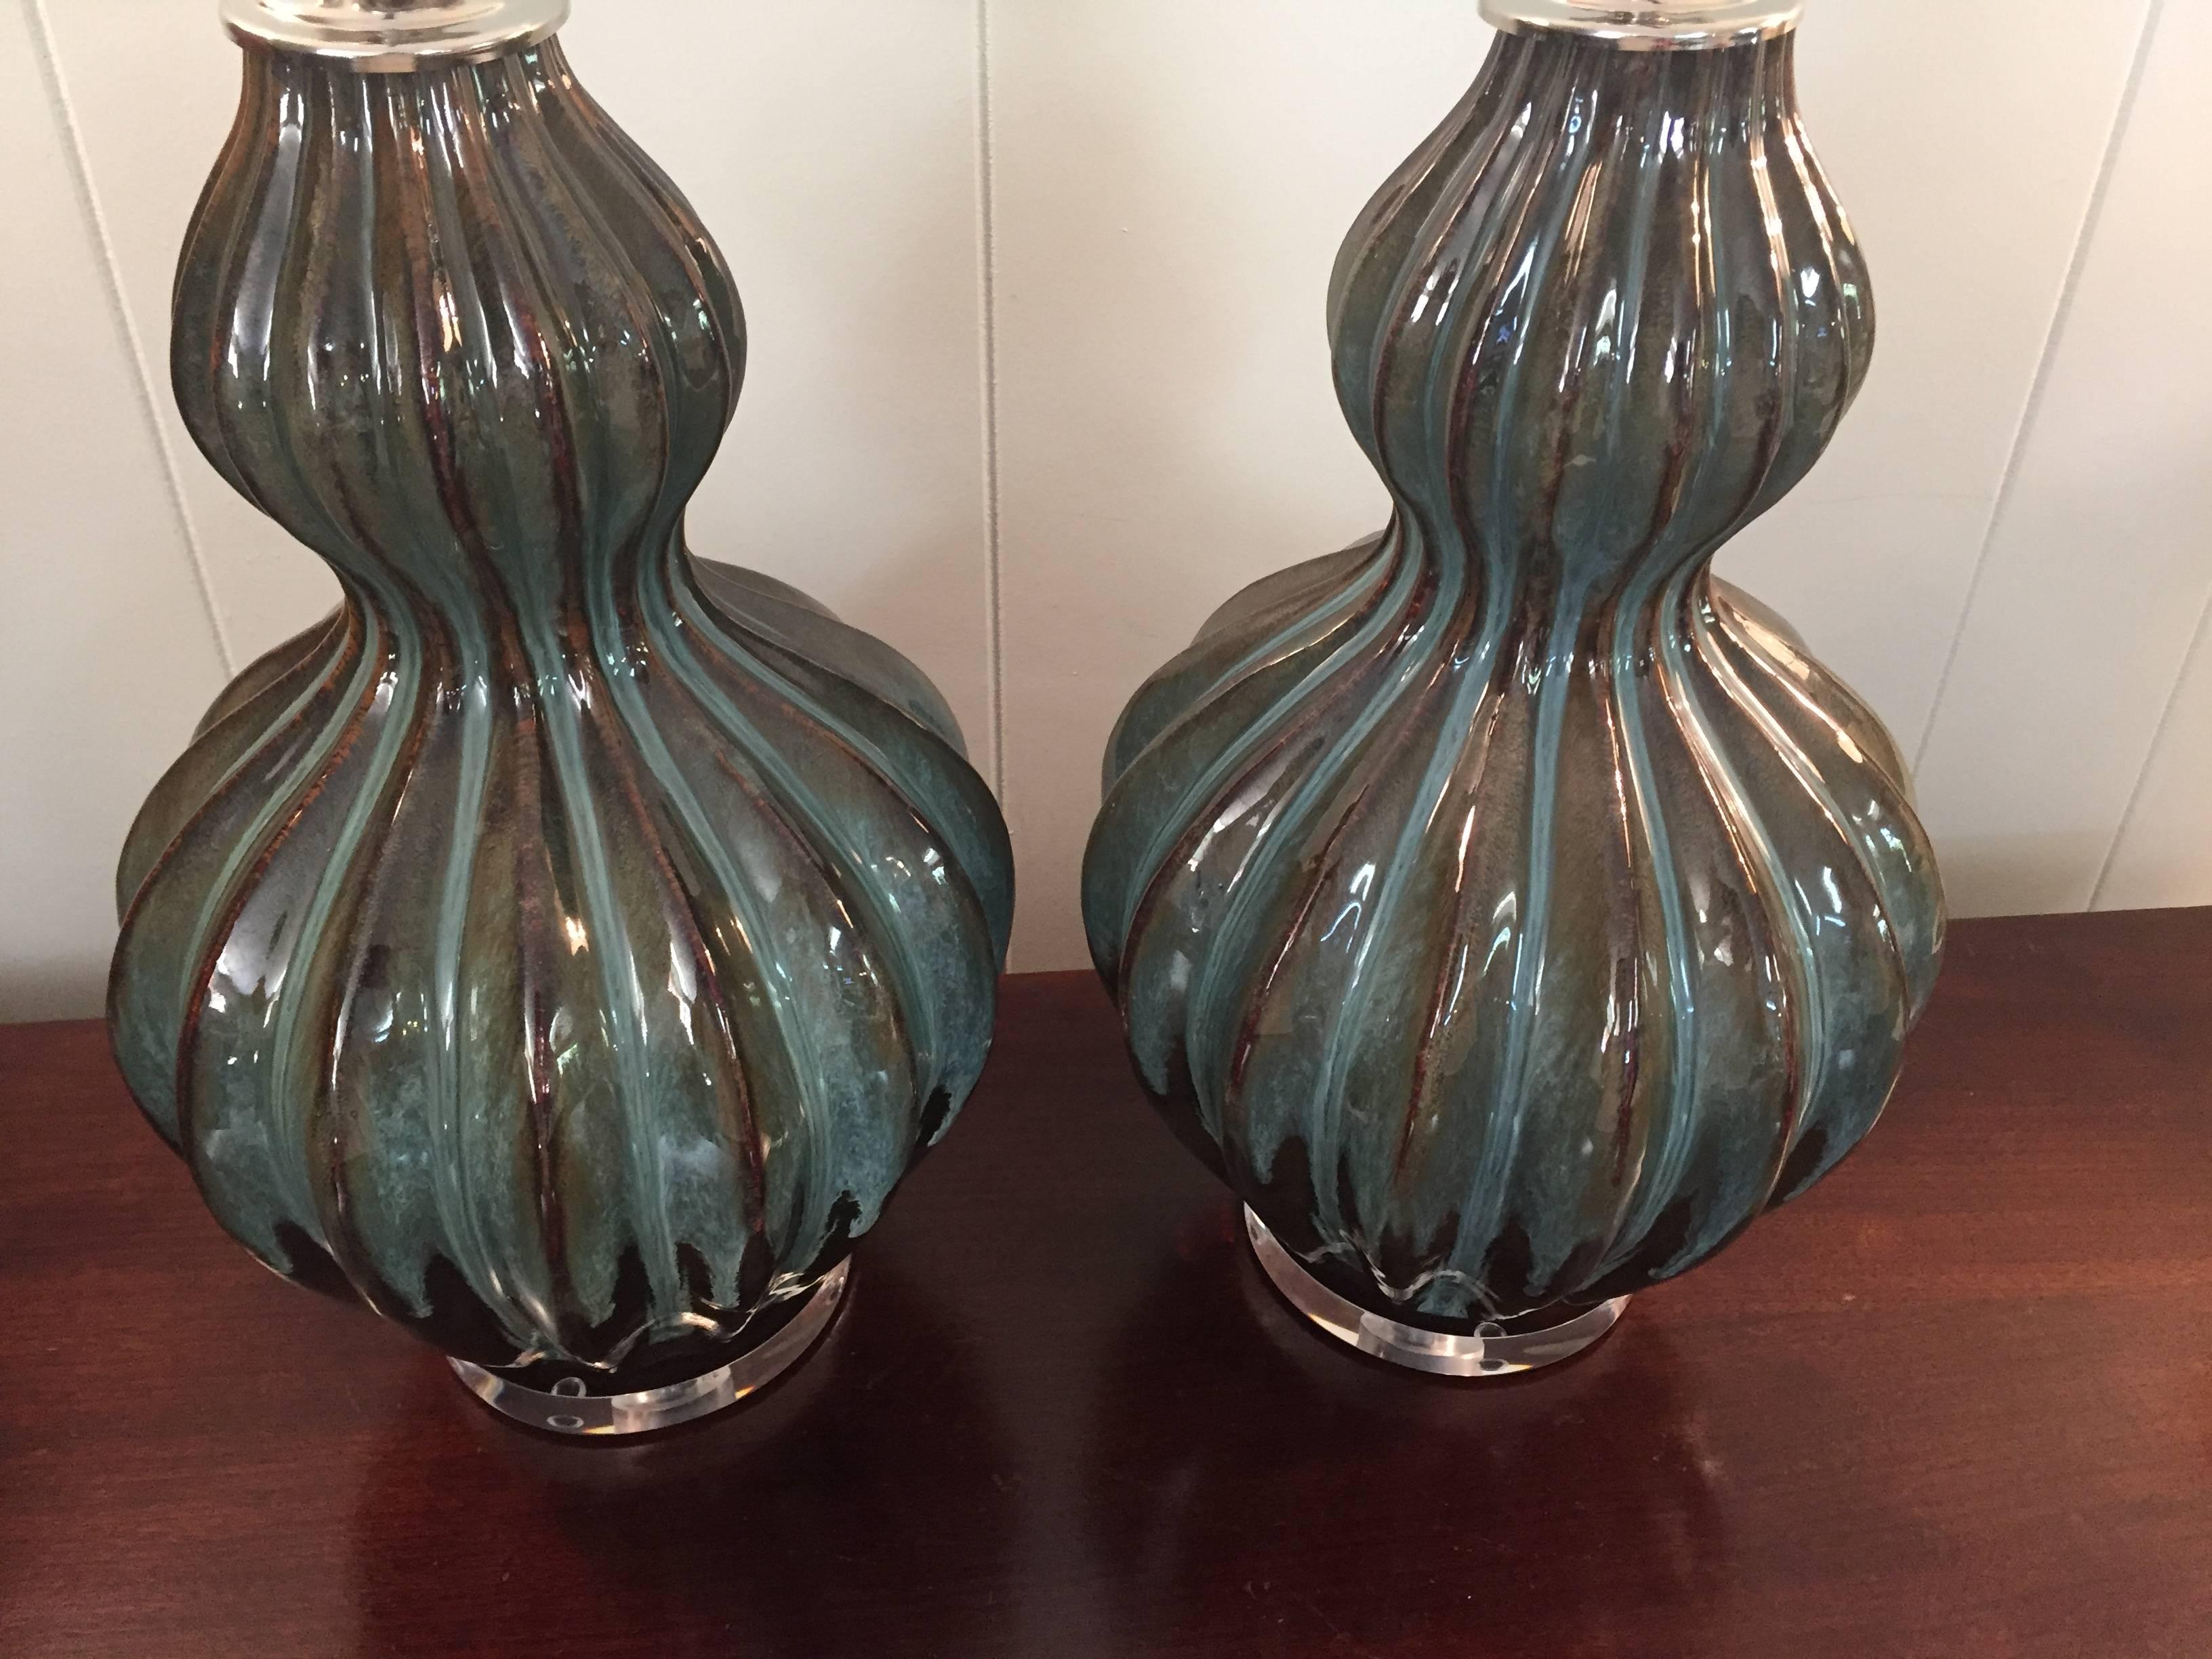 Offered is a beautiful, pair of 1960s Italian turquoise and brown drip-glaze ceramic, hourglass/gourd shaped lamps. The pieces have new chrome caps, Lucite bases and wiring.